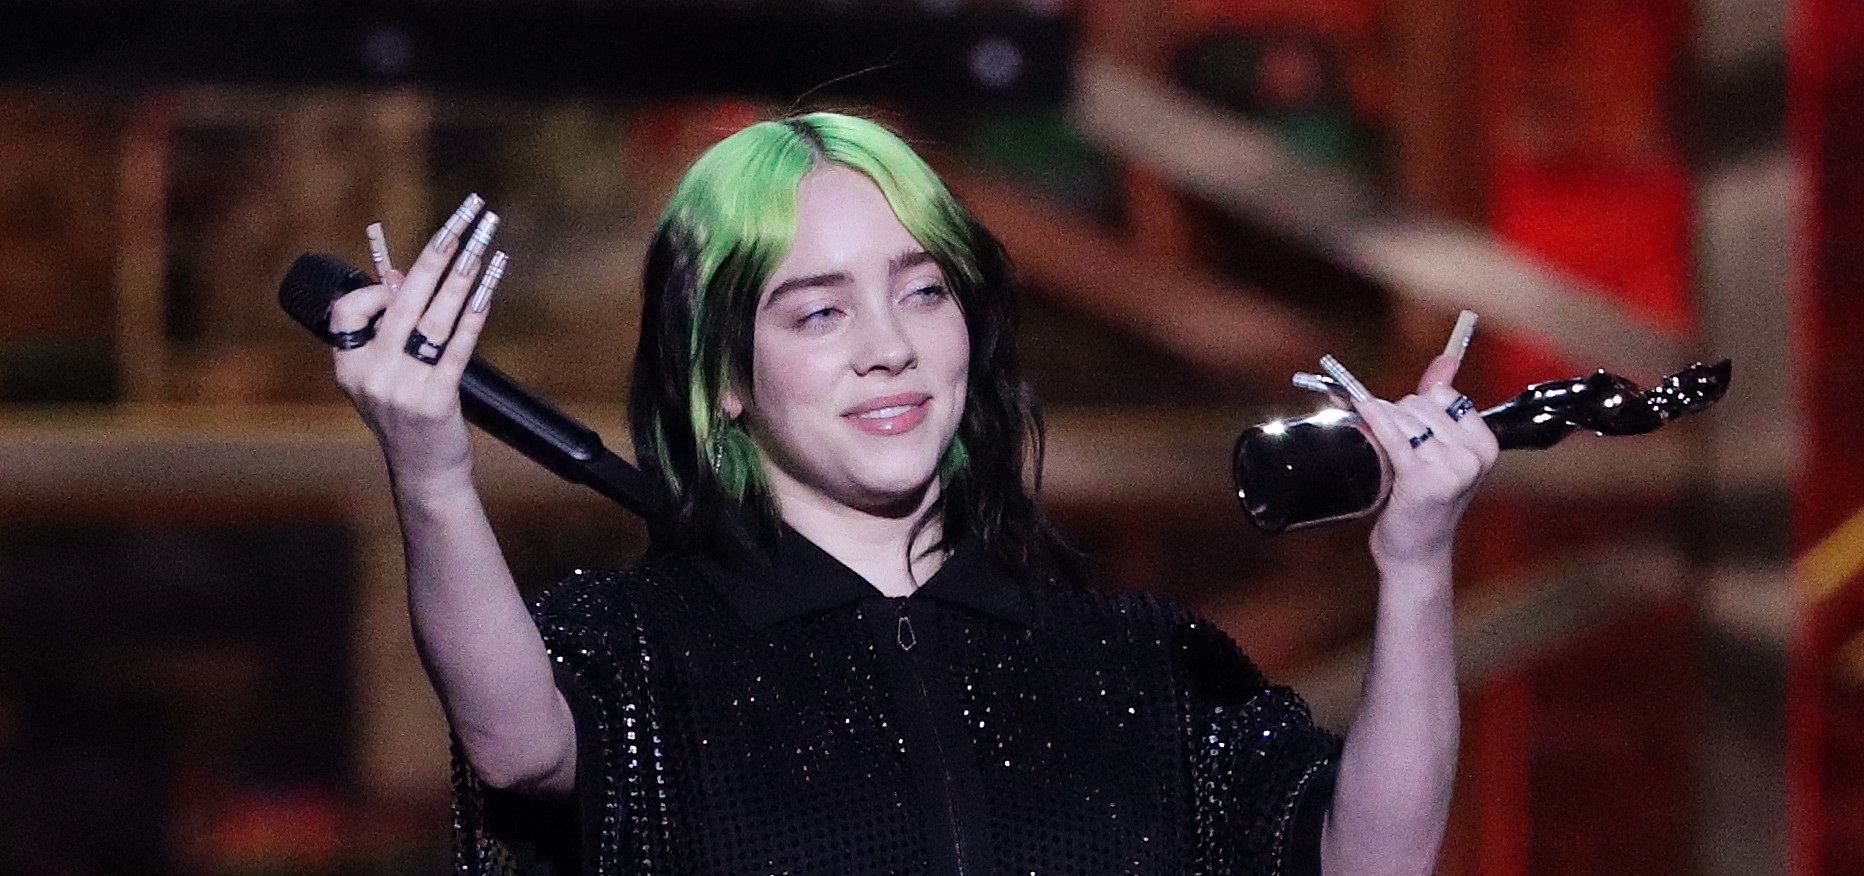 Billie Eilish Absolutely Nailed Her First Performance Of New Bond Song – ‘No Time To Die’